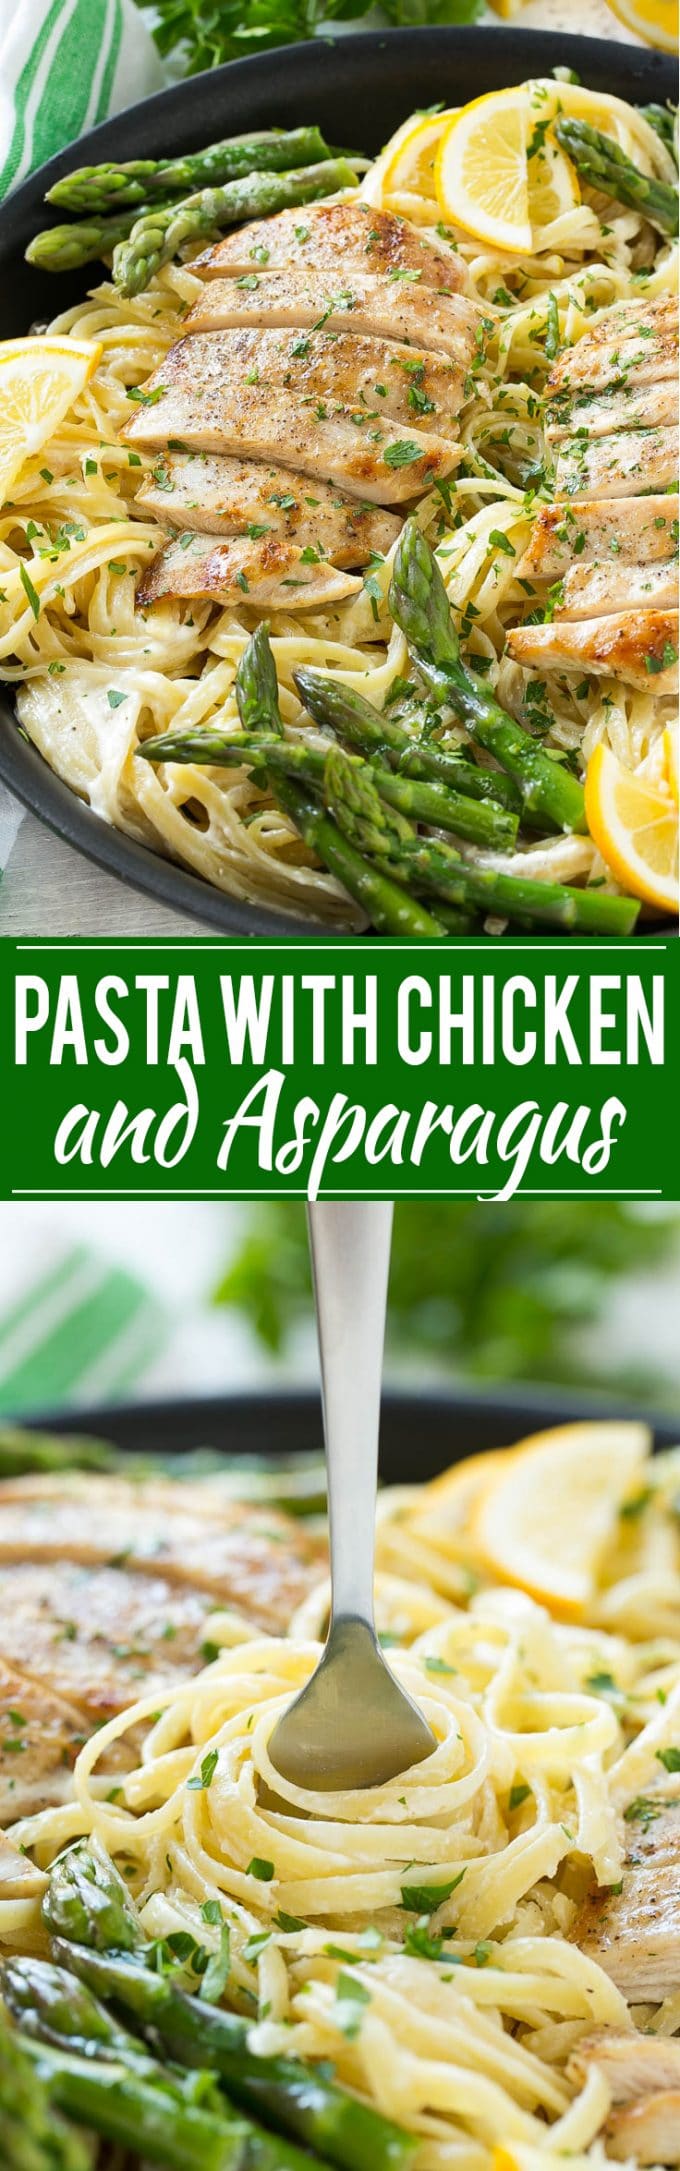 Lemon Asparagus Pasta with Grilled Chicken Recipe | Asparagus Pasta | Grilled Chicken Pasta | Easy Pasta Recipe #pasta #asparagus #lemon #chicken #dinner #dinneratthezoo